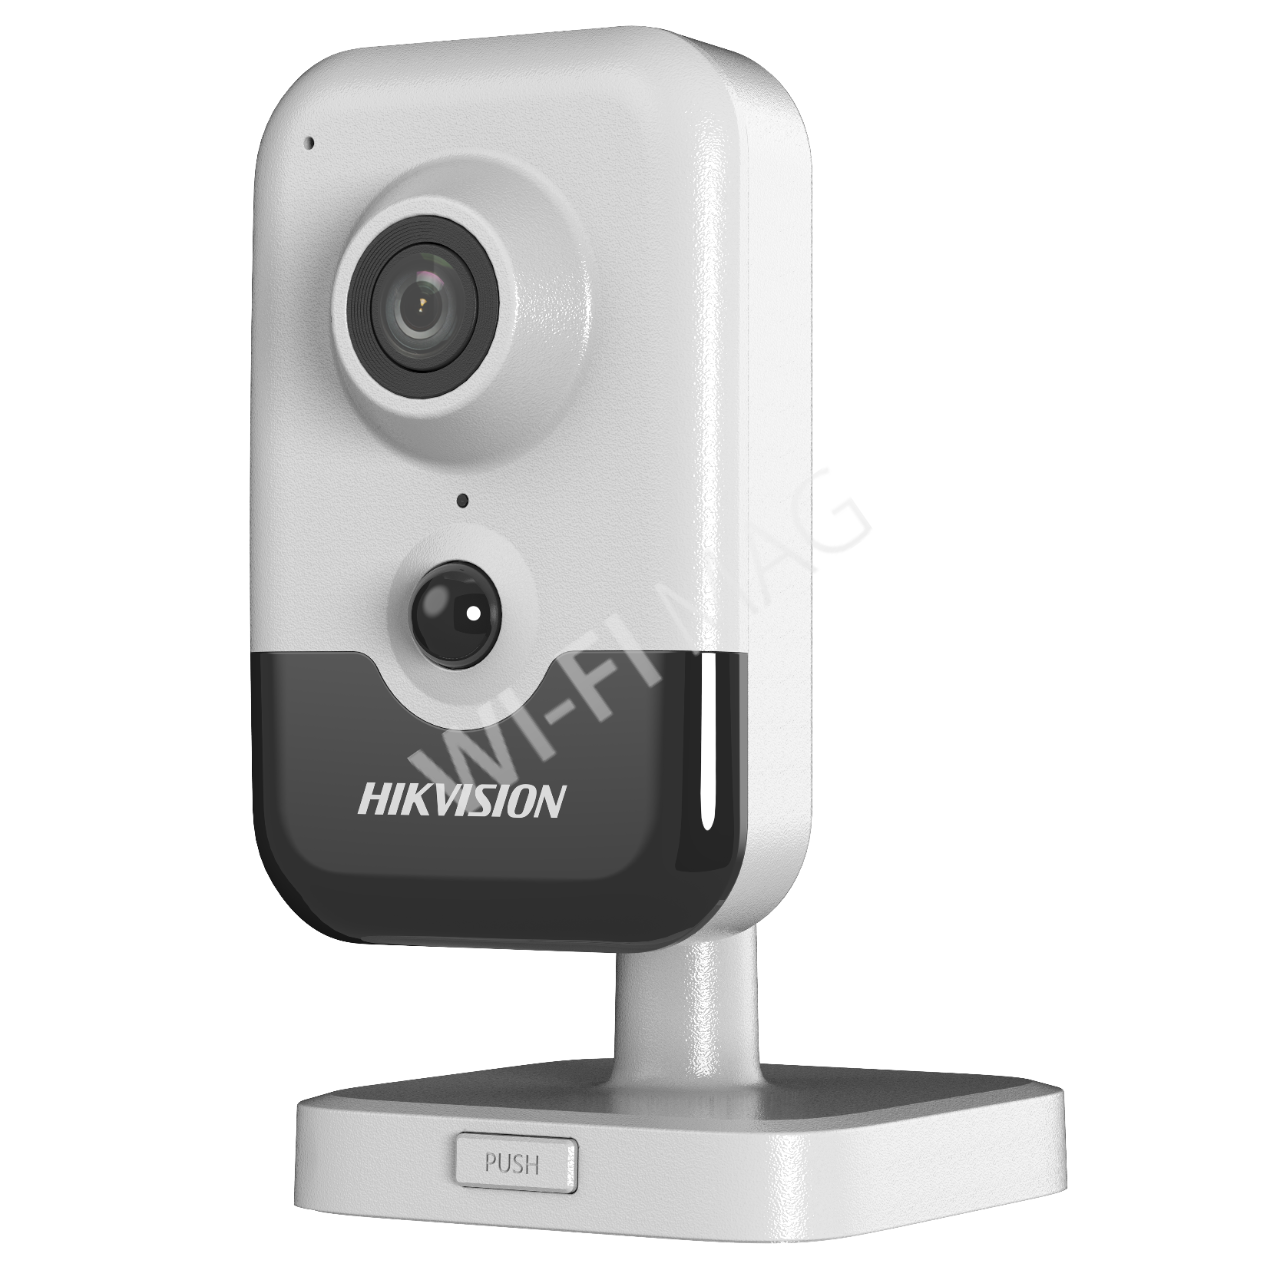 Hikvision DS-2CD2443G0-IW(4mm)(W) 4Мп IP-камера